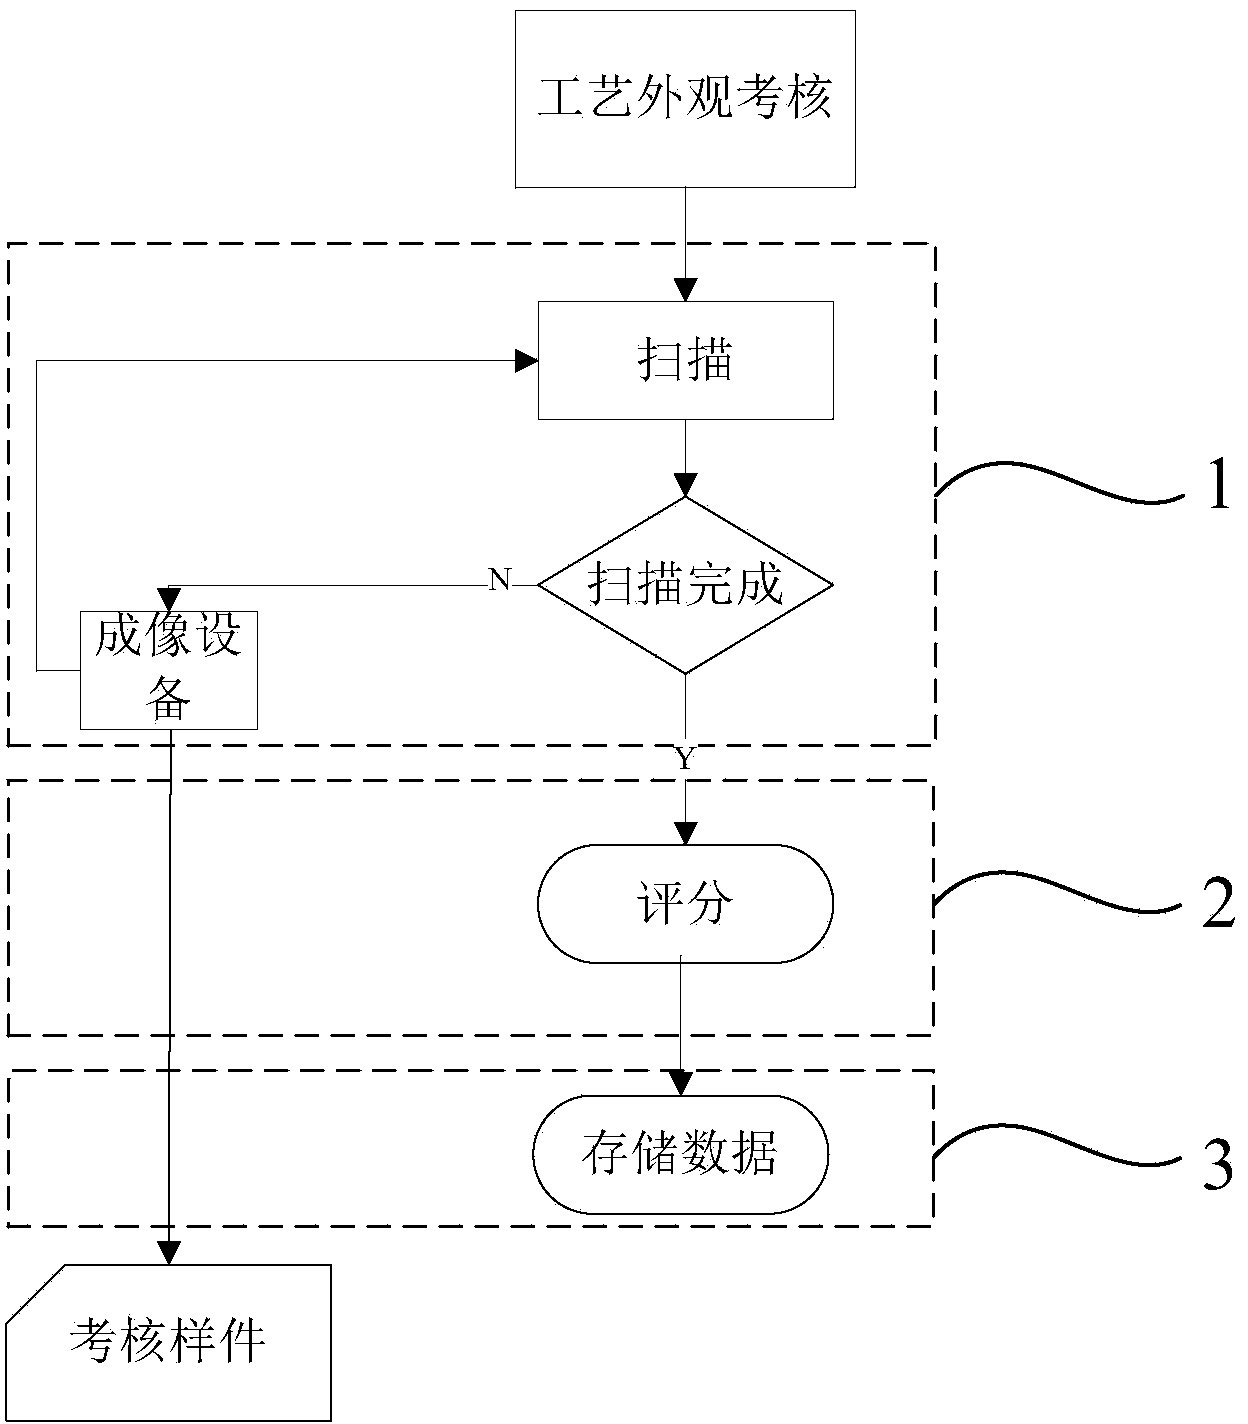 Technology assessment system and method